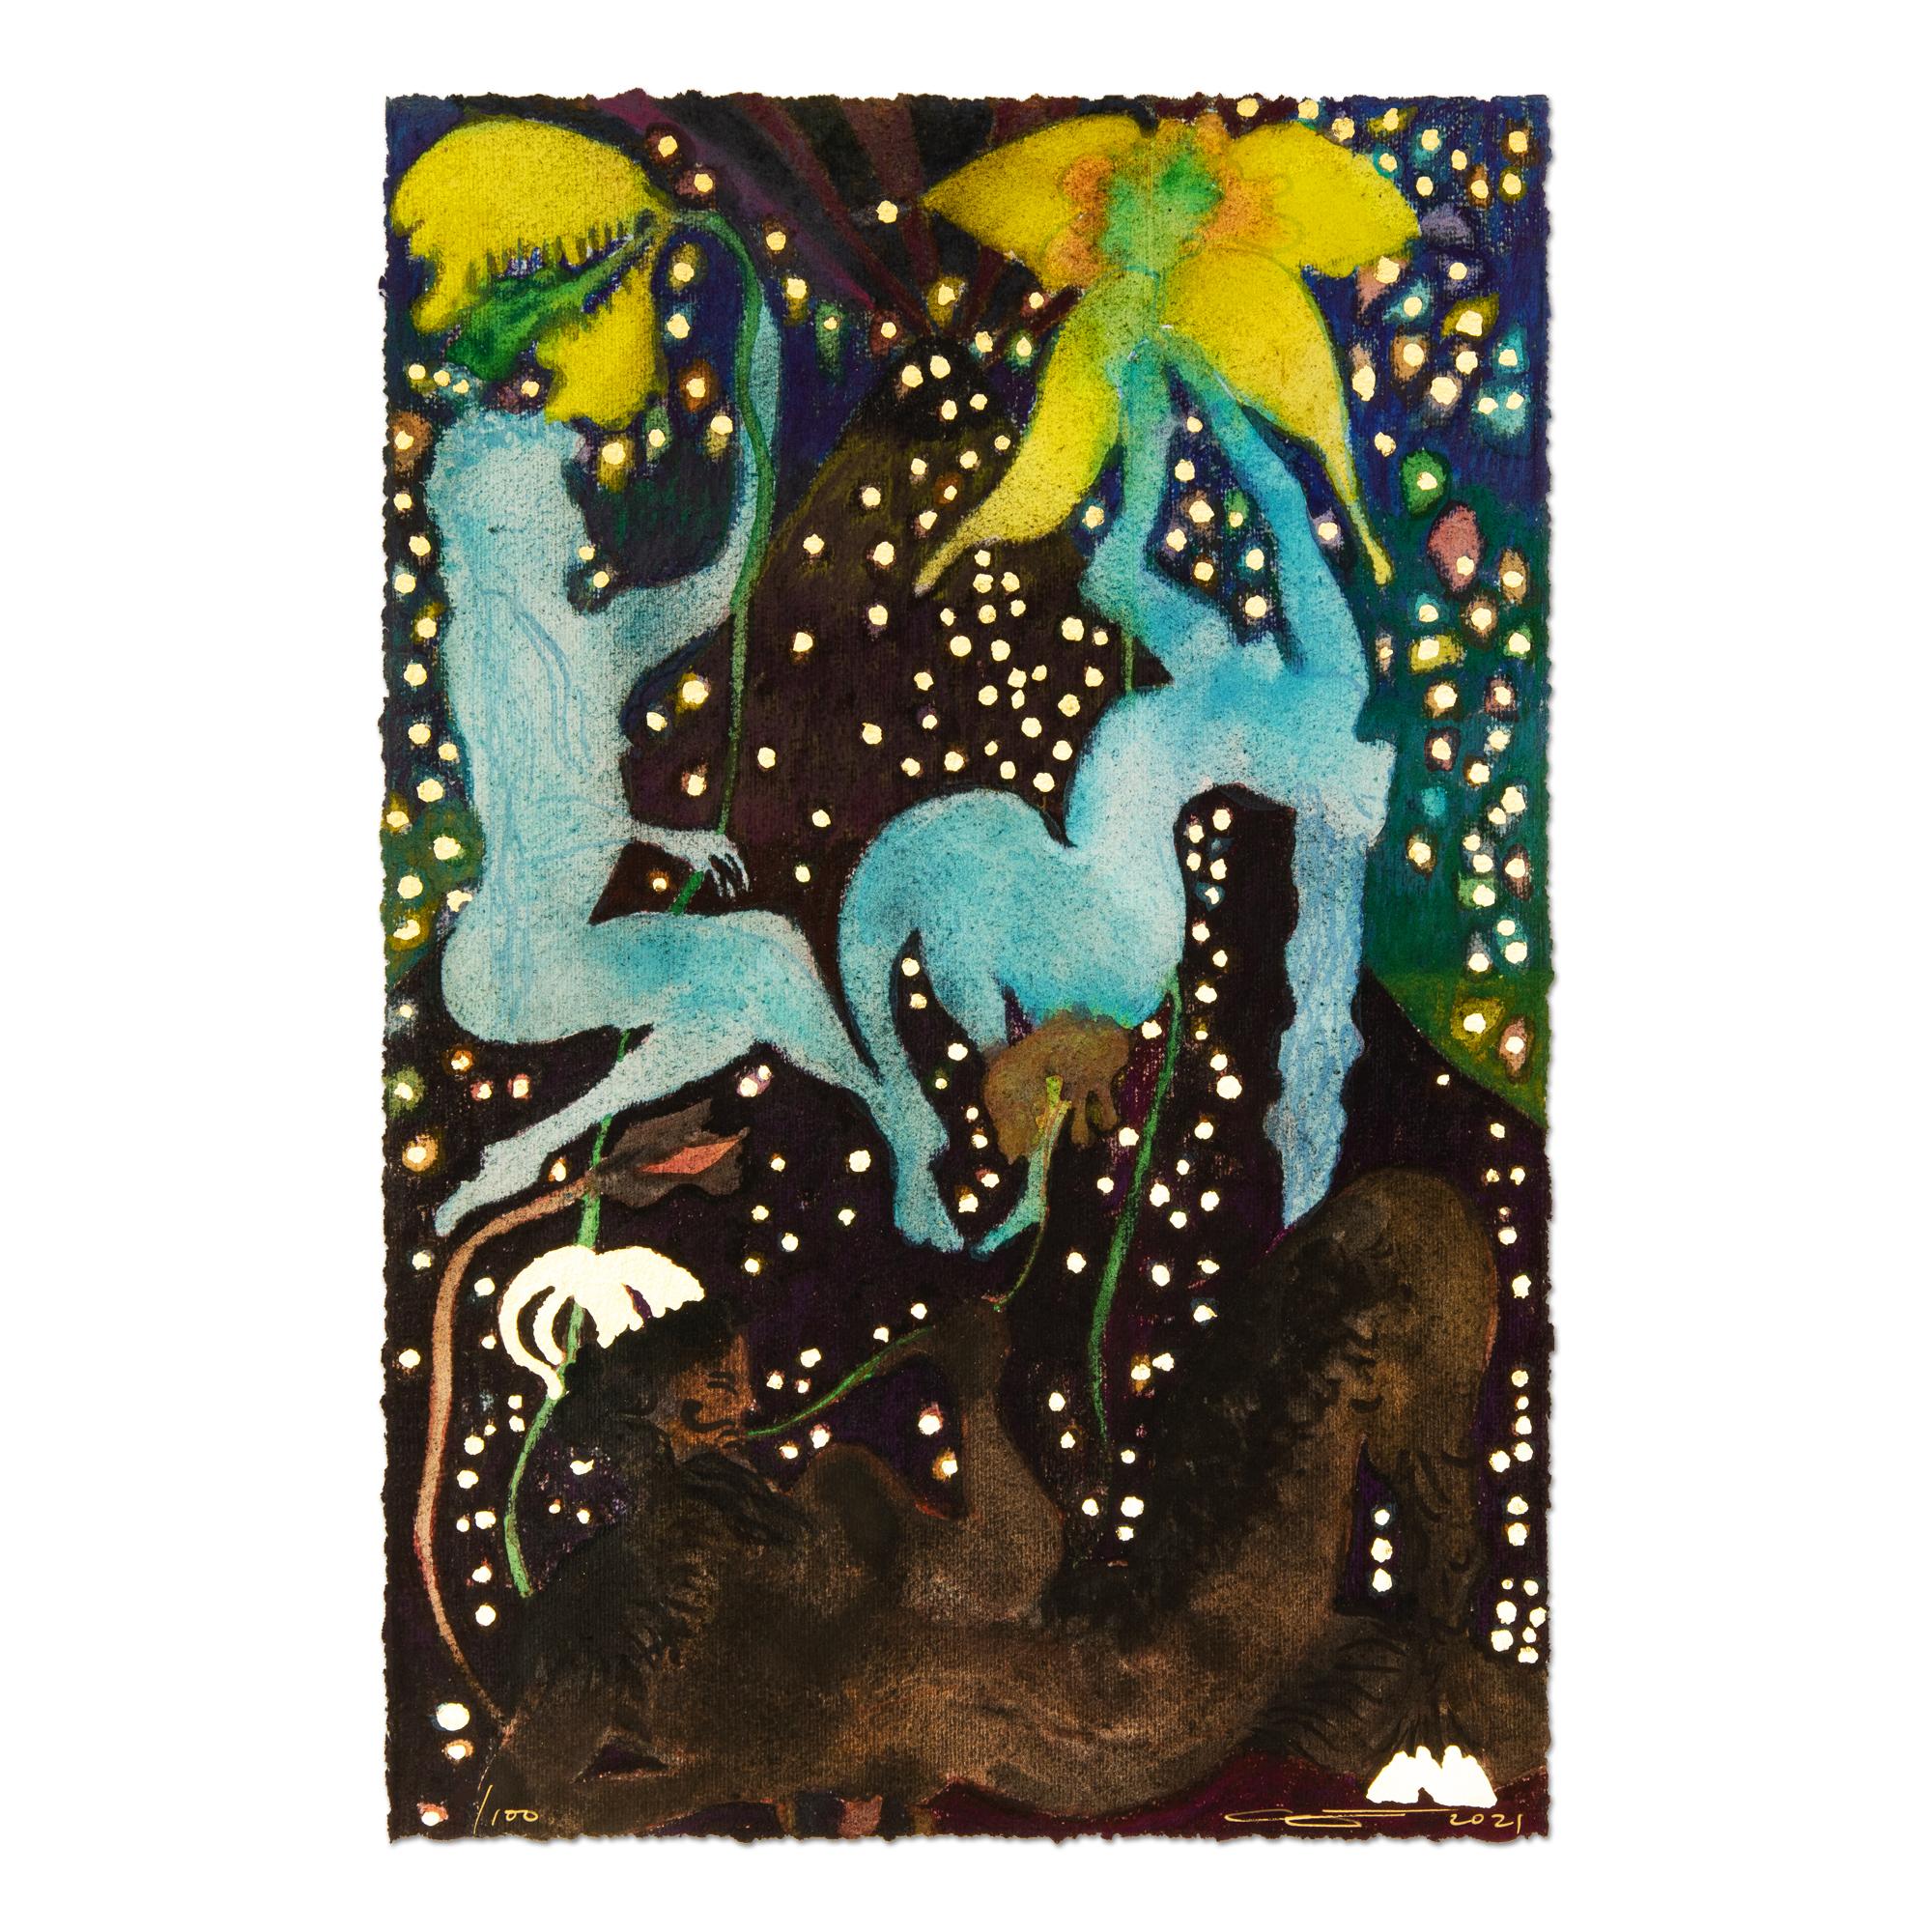 Chris Ofili, Afternoon with La Soufrière: Signed Print, British Contemporary Art